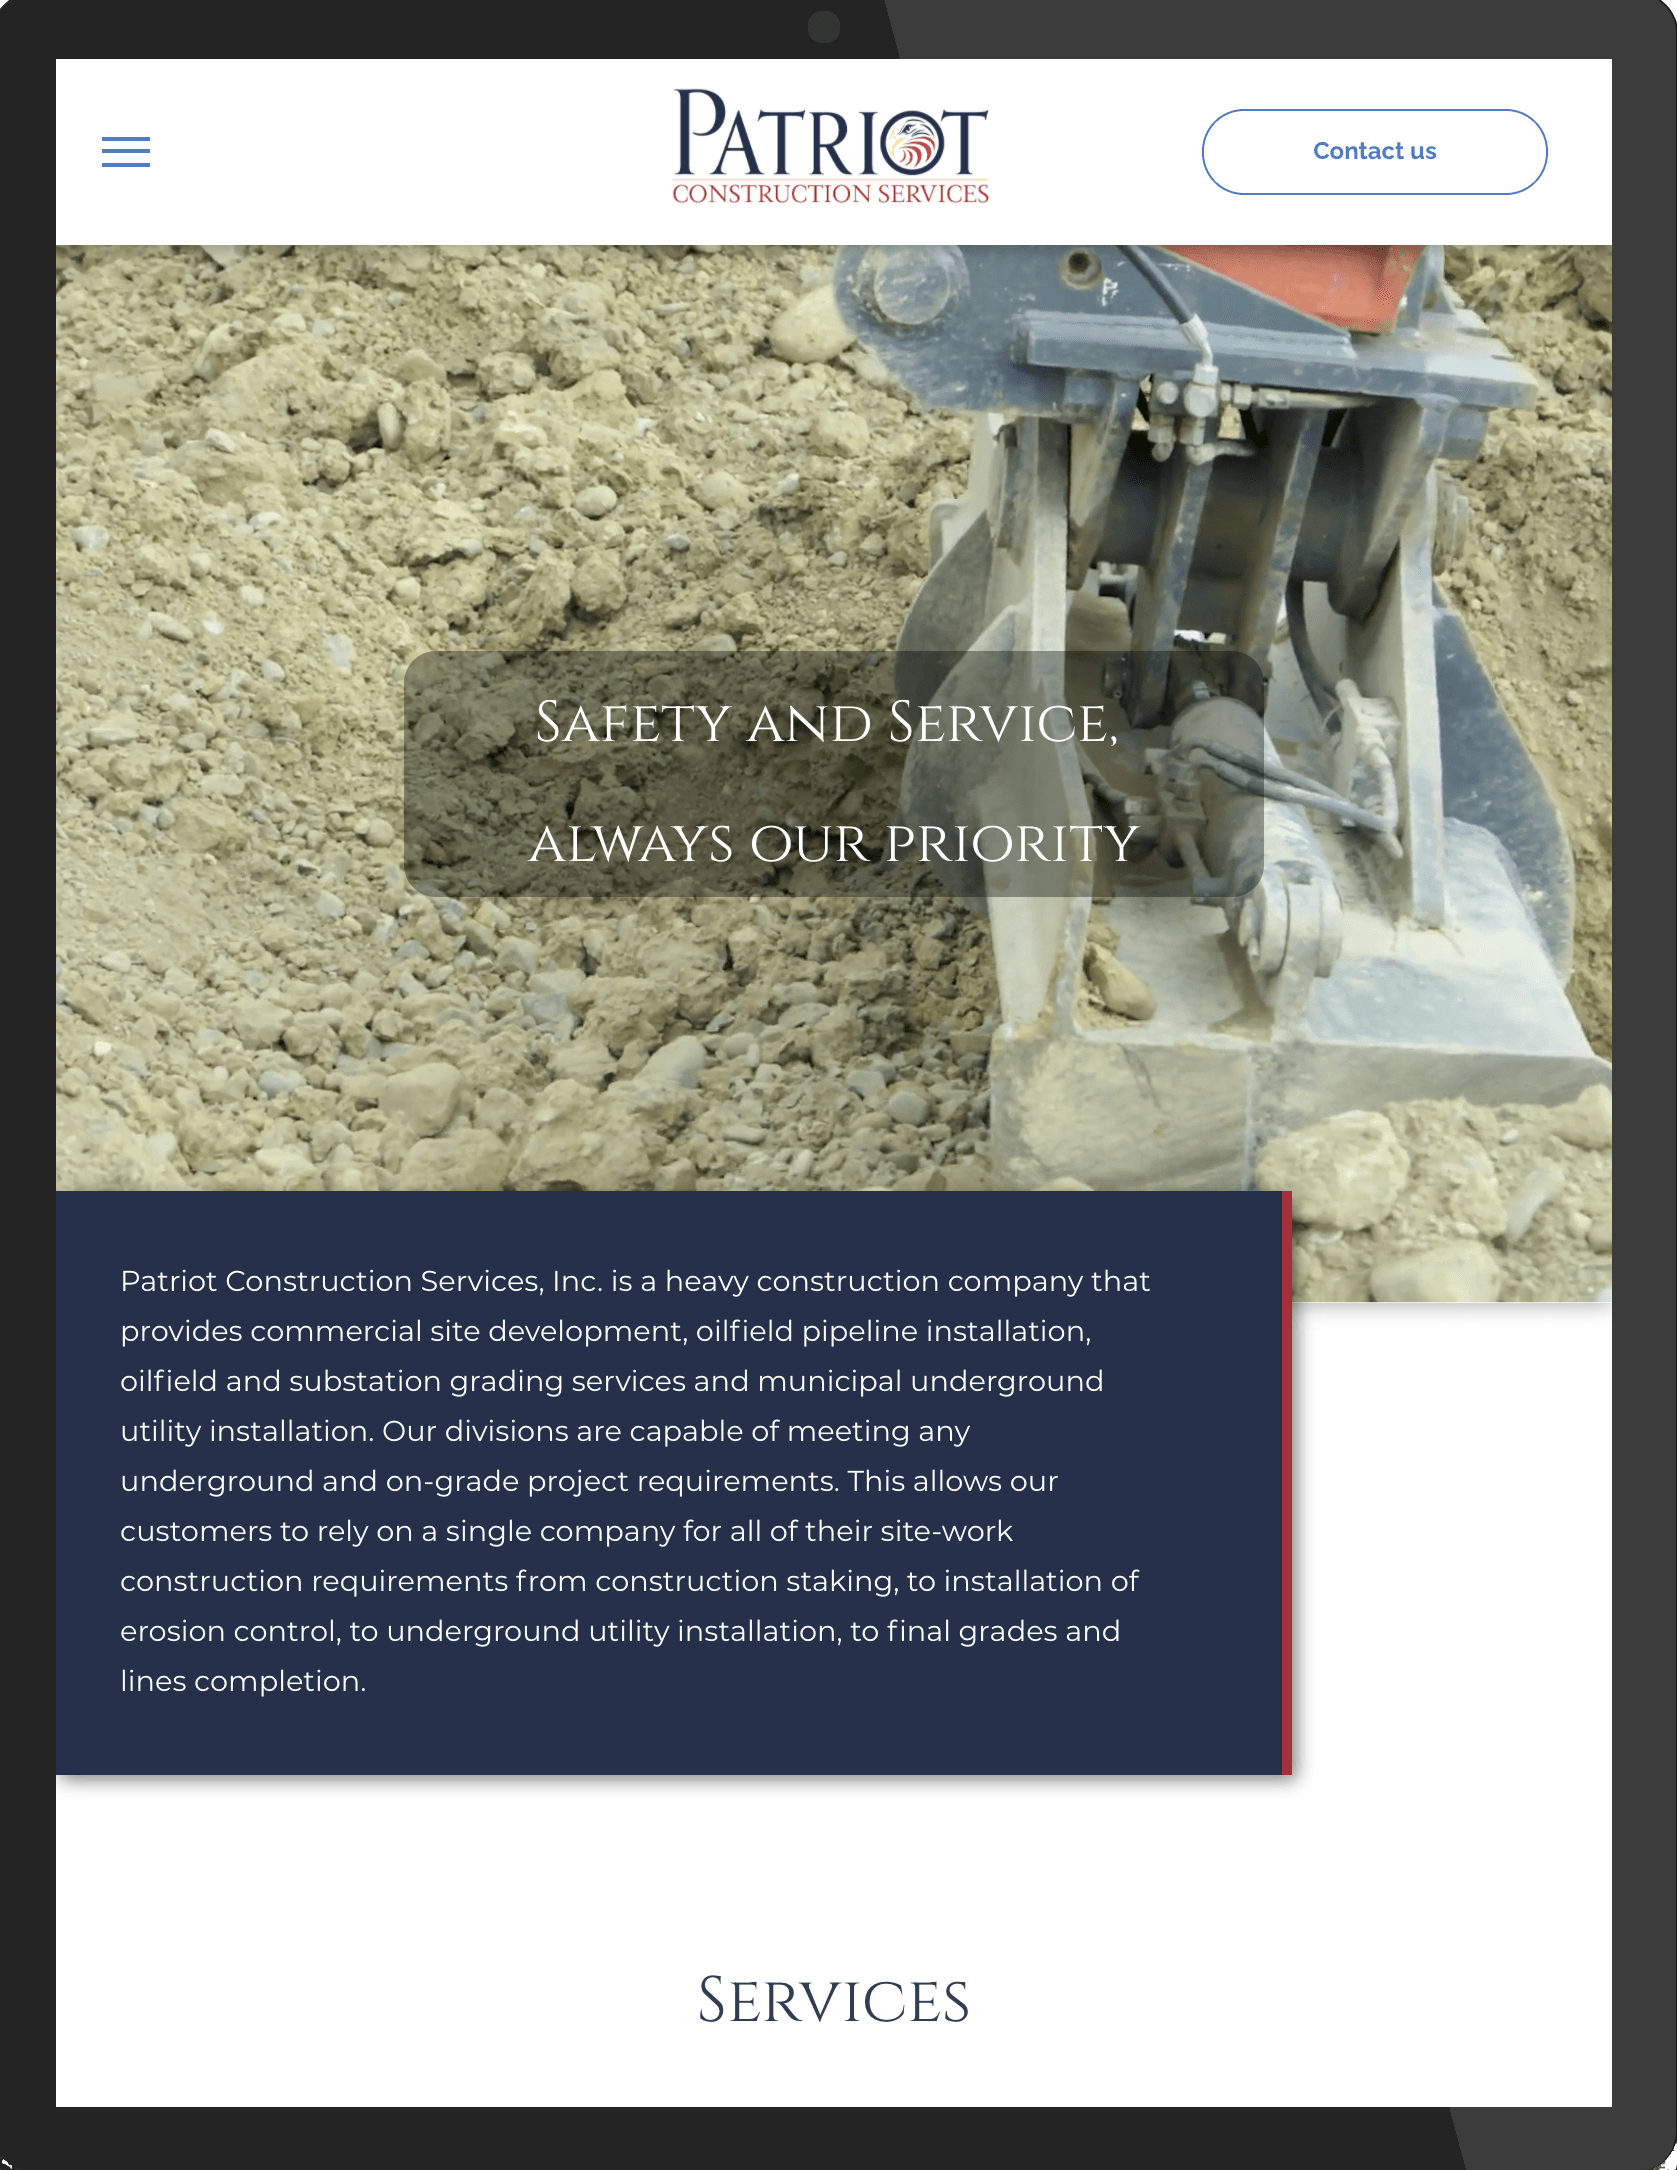 A patriot construction website shows a picture of a bulldozer in the dirt.